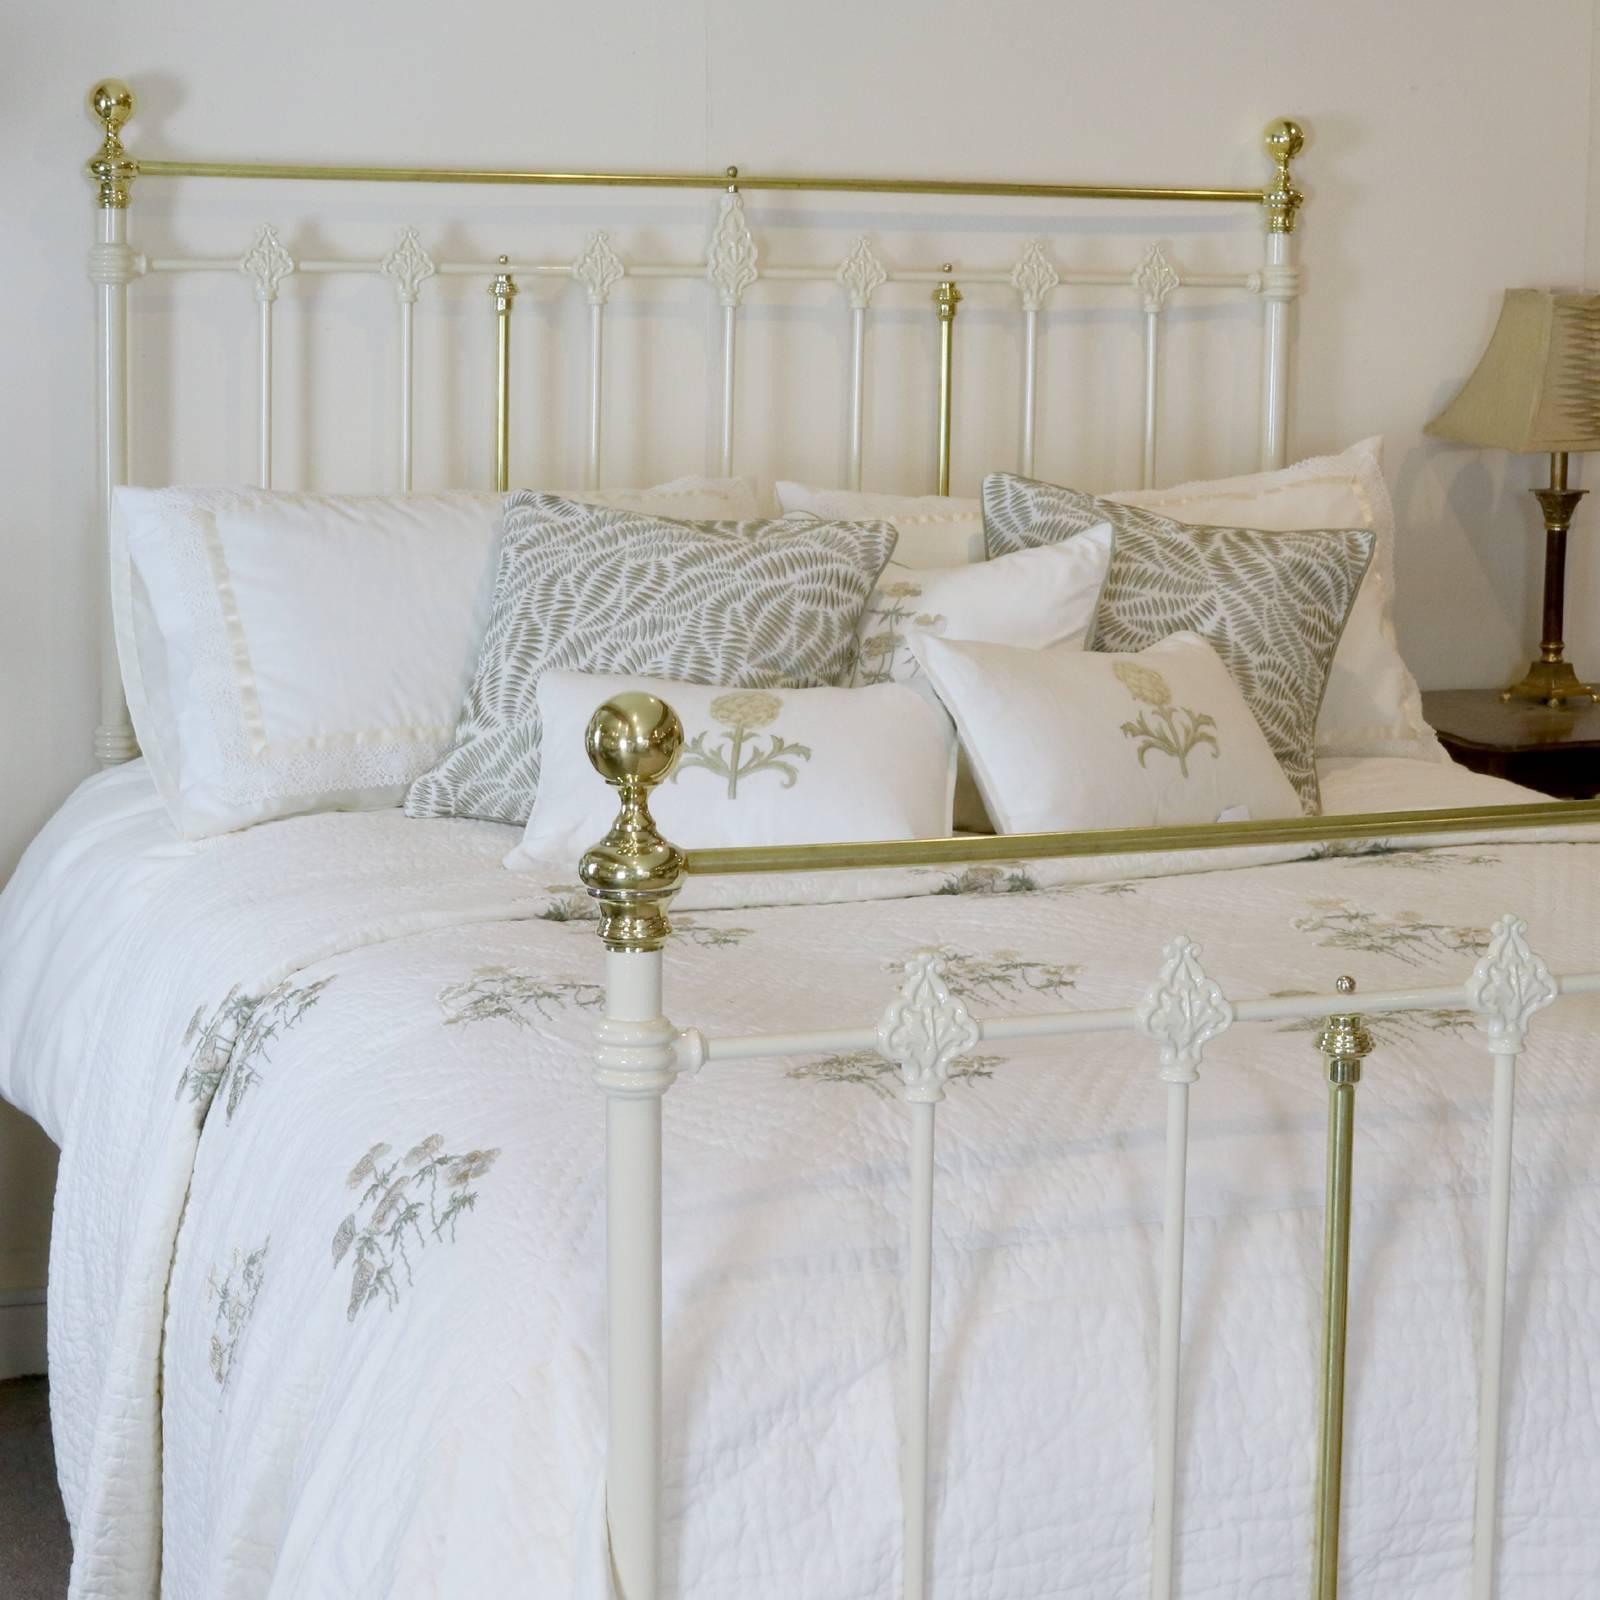 A Victorian brass and iron bed in cream in the British king-size or American queen-size.

The price is for the bed alone, the base, mattress and bedding is extra and can be provided by Seventh Heaven. Measures: 5ft.

